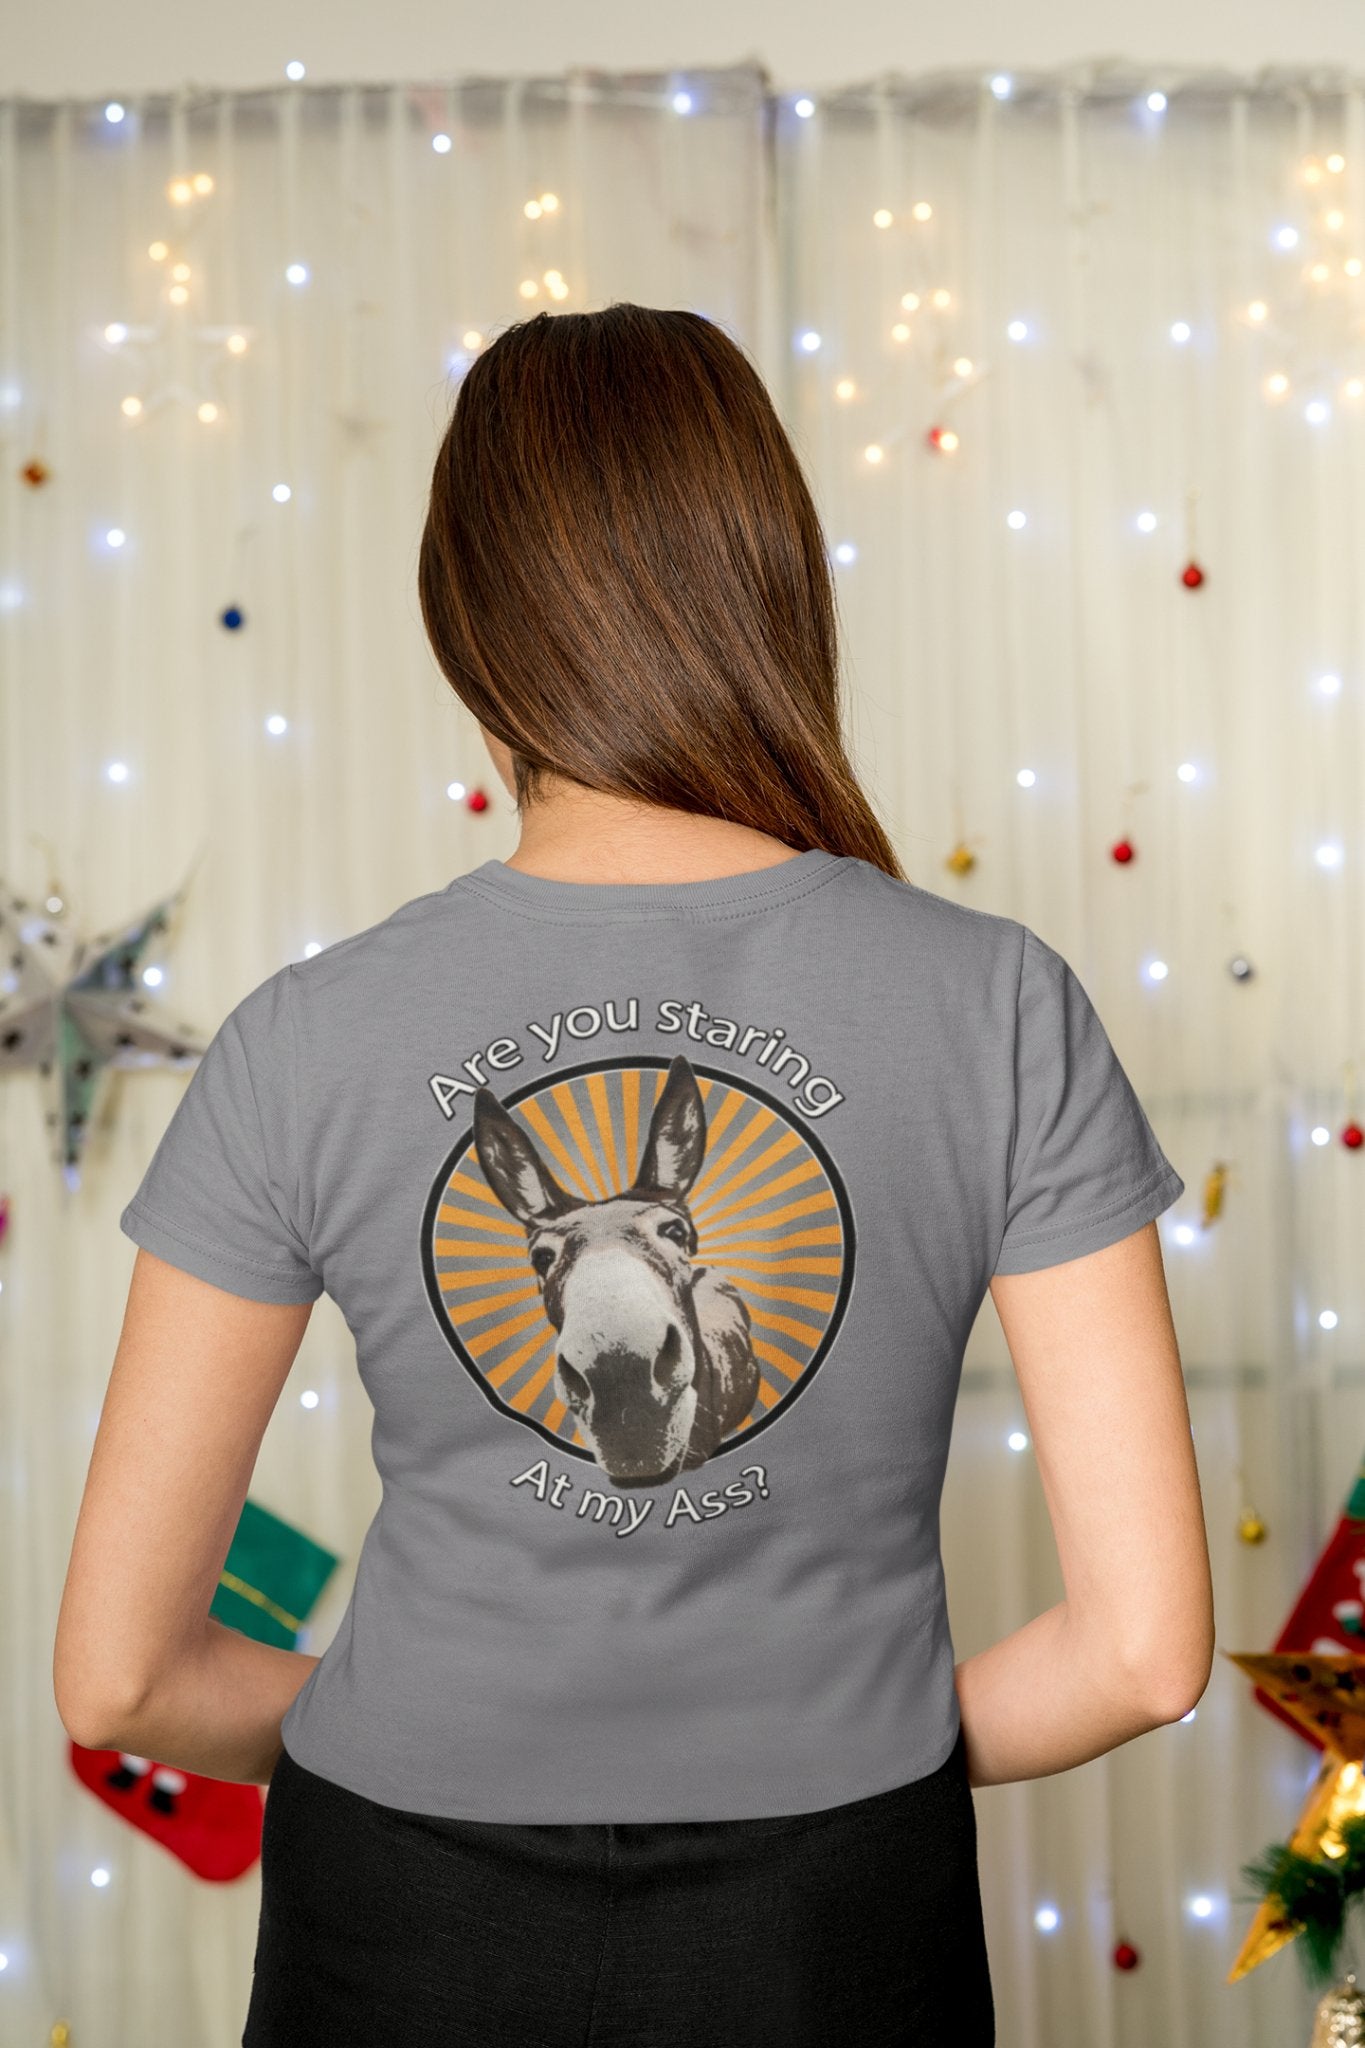 Are you staring at my ass? - Unisex T-Shirt ass christmas Christmas gift cute ass dads day gift donkey gift for dad gift for grandpa gift for her gift for him gift for mom gift for sister gift for wife little donkey moms gift Unique gift